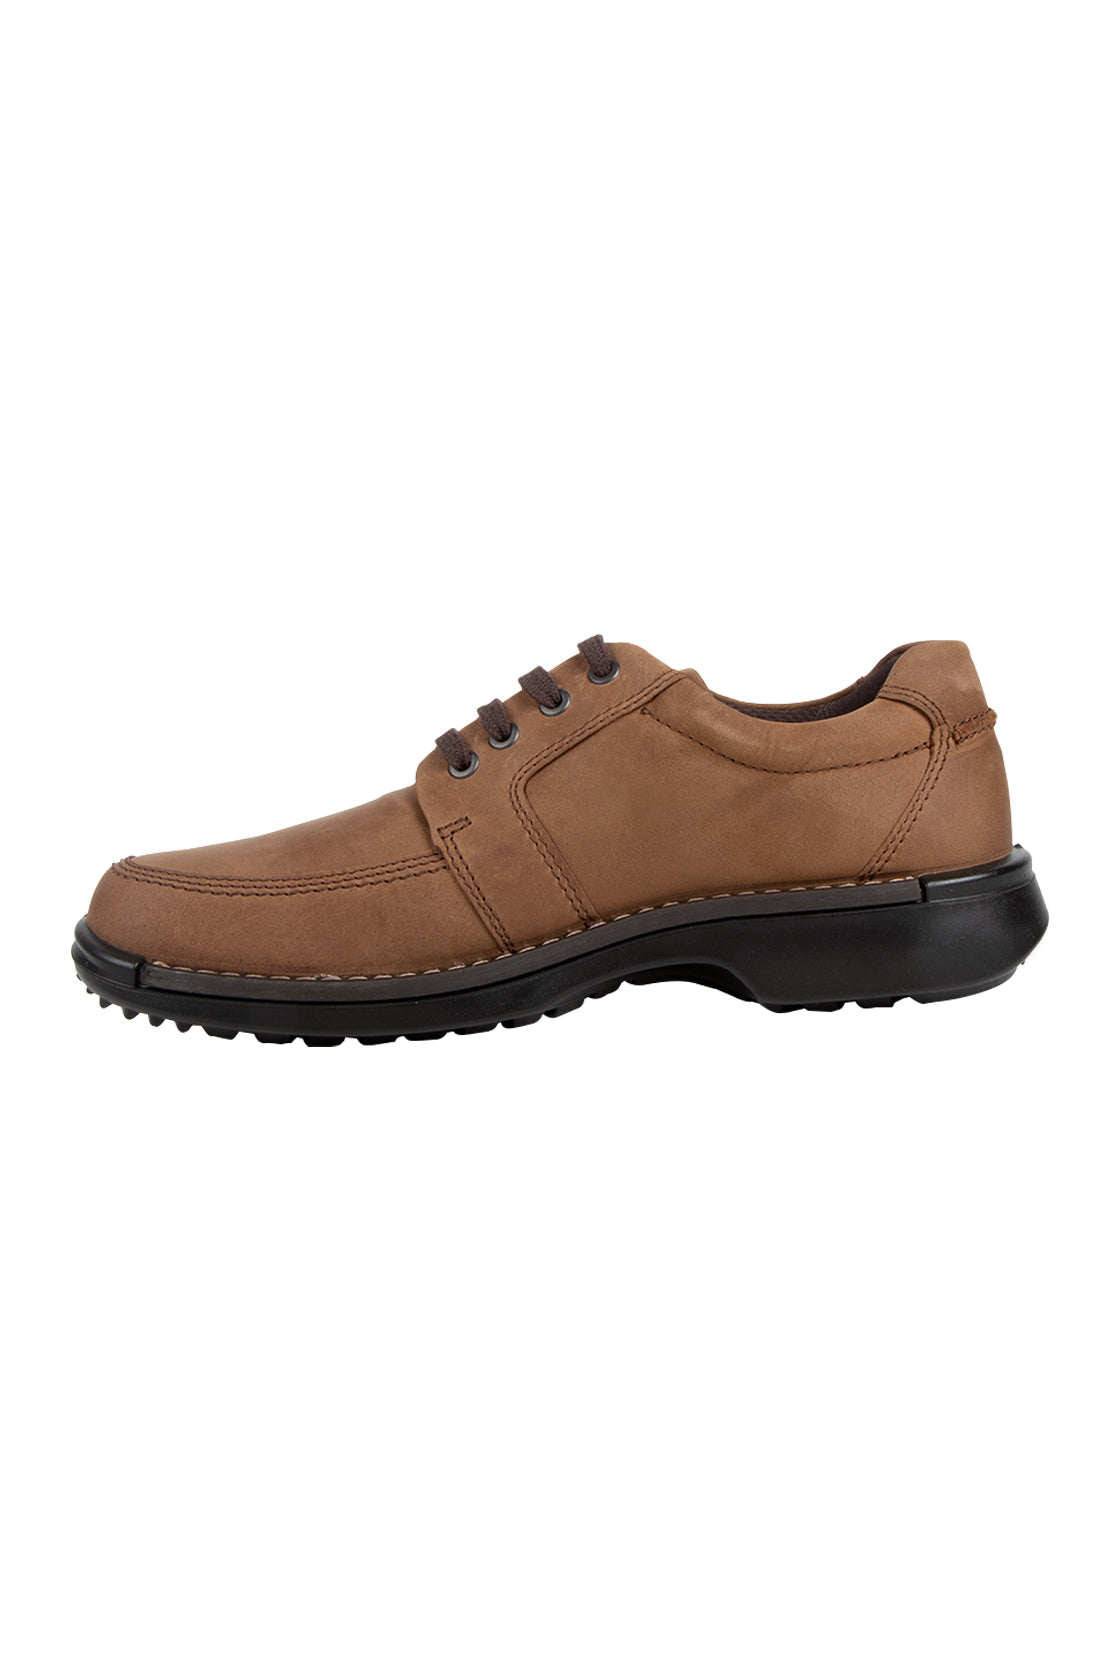 Ecco Mens Irving Shoes - Cocoa Brown Coffee